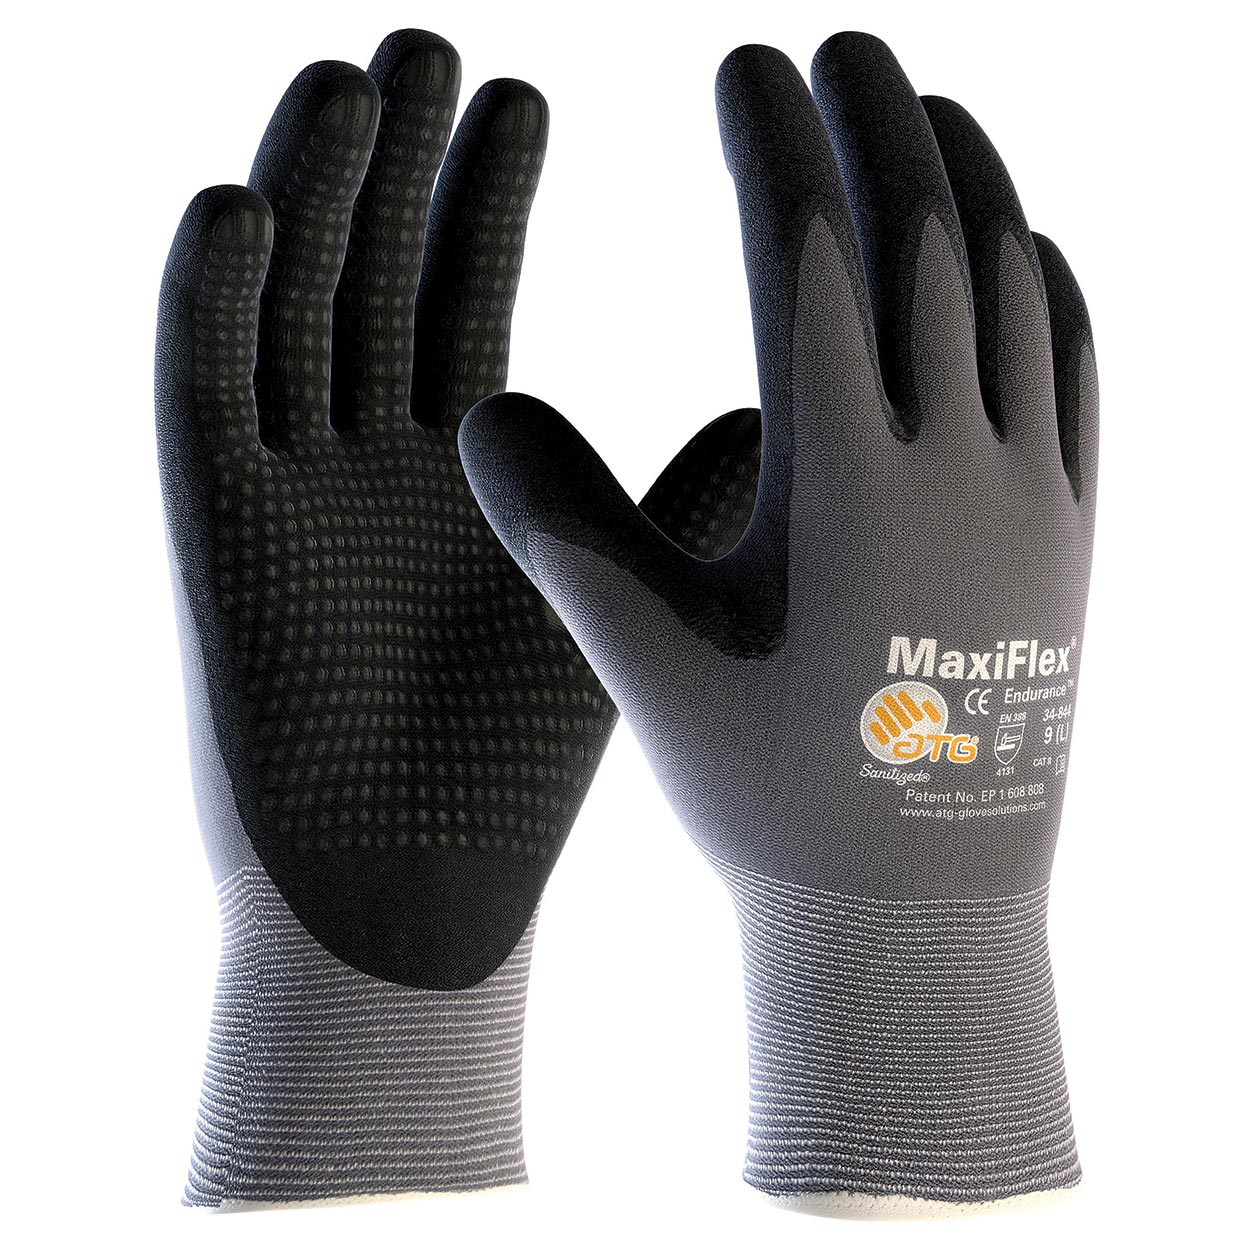 PIP 34-844 MaxiFlex Endurance Seamless Knit Nylon Gloves with Nitrile Coated Palm - Micro Dot Palm (12 Pairs)